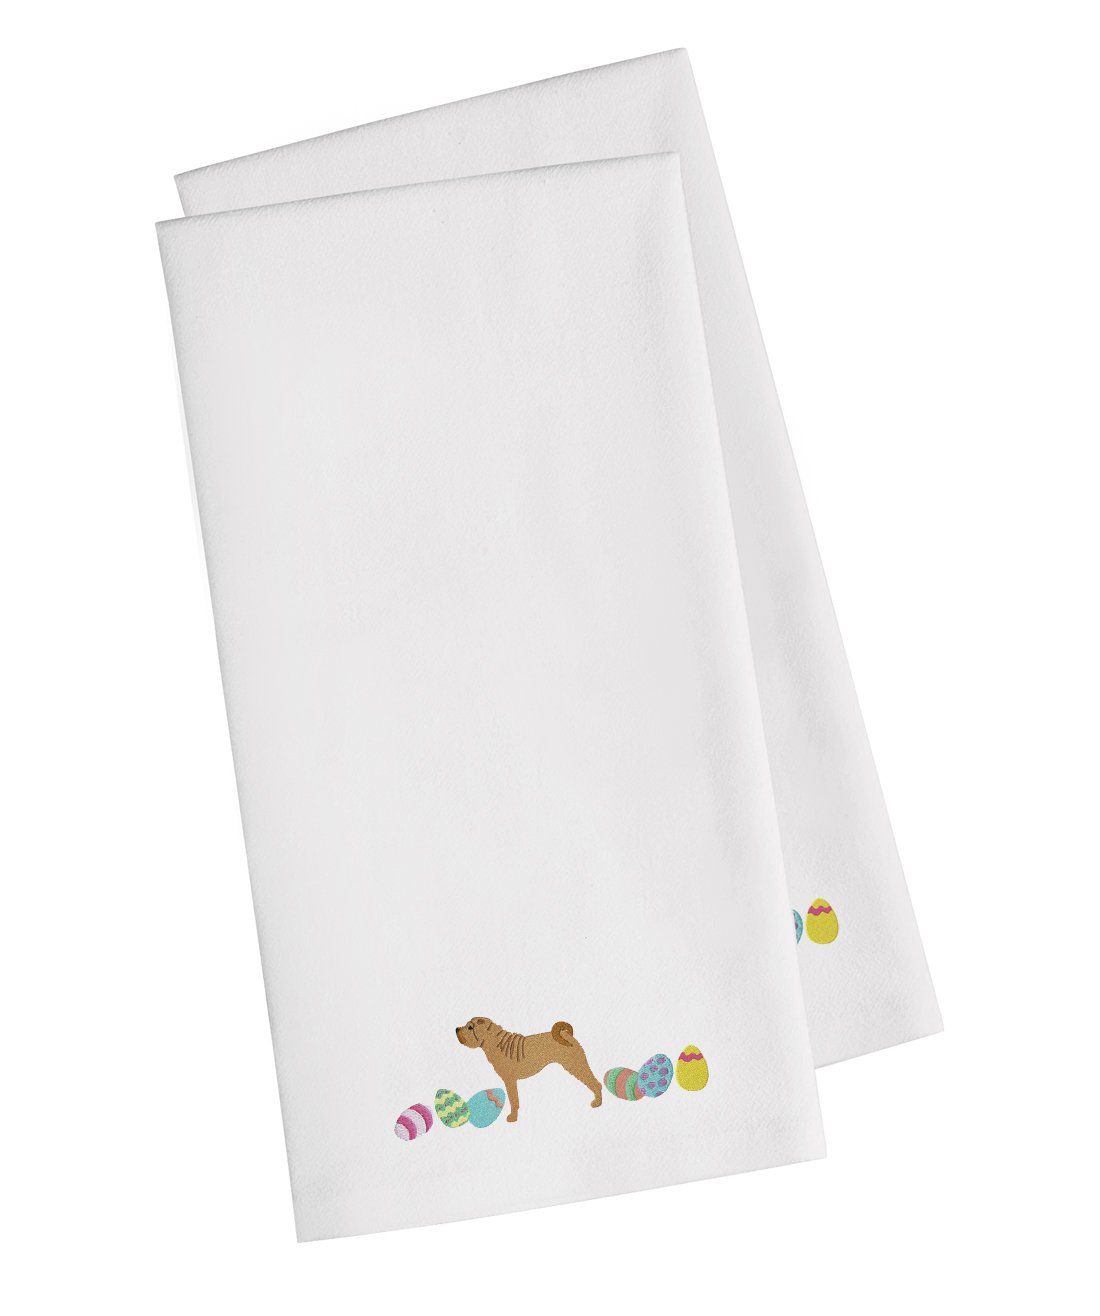 Shar Pei Easter White Embroidered Kitchen Towel Set of 2 CK1684WHTWE by Caroline's Treasures